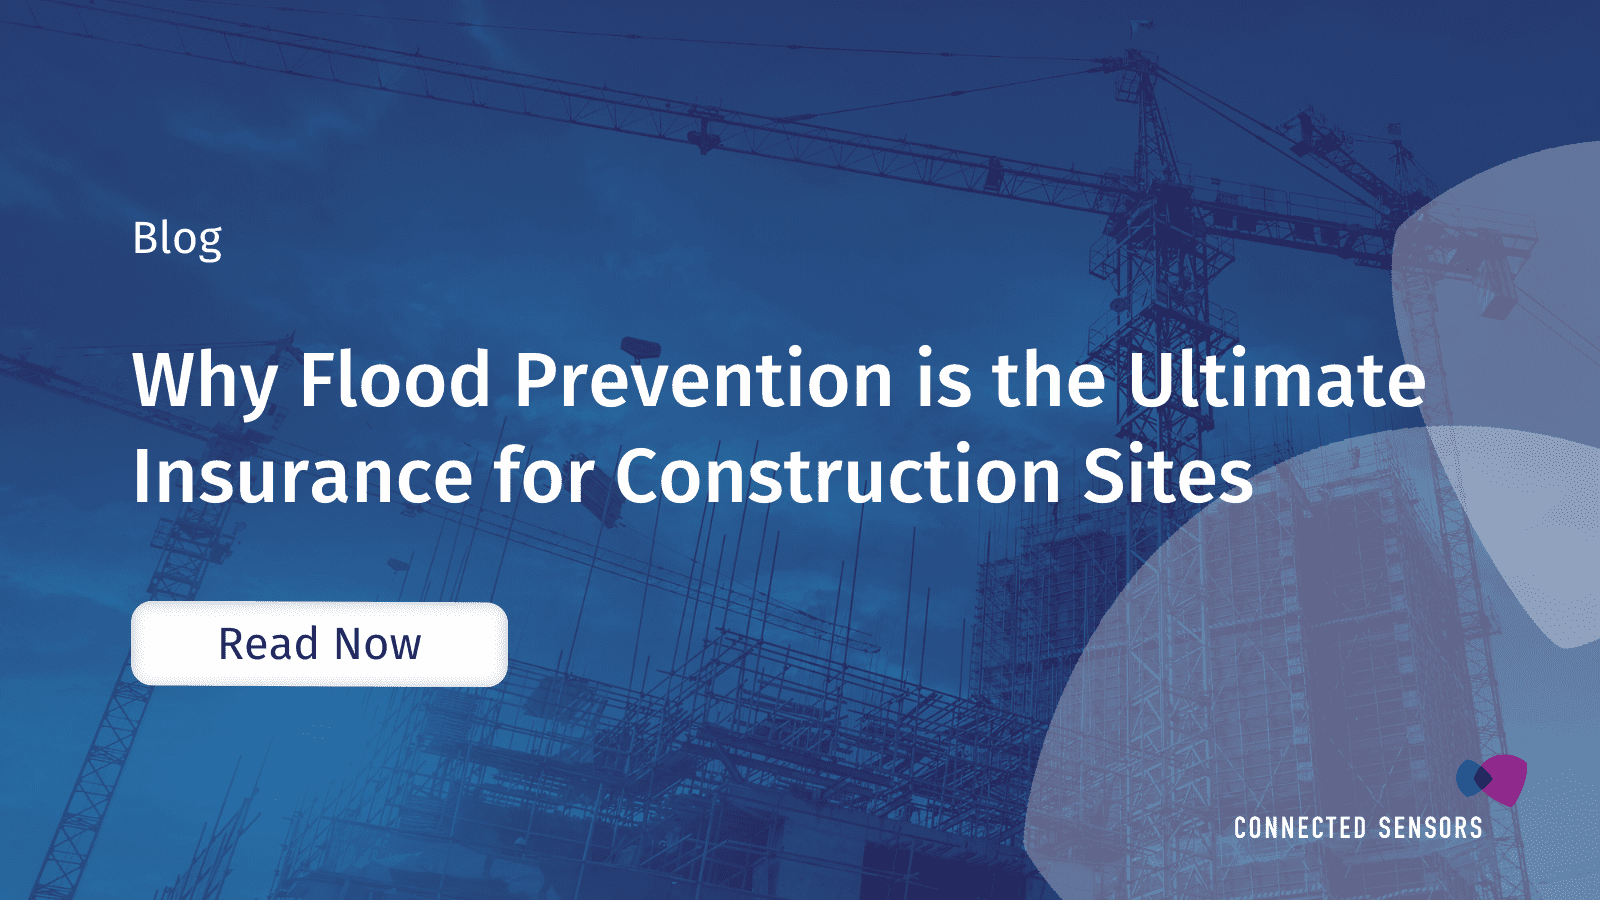 Why Flood Prevention is the Ultimate Insurance for Construction Sites